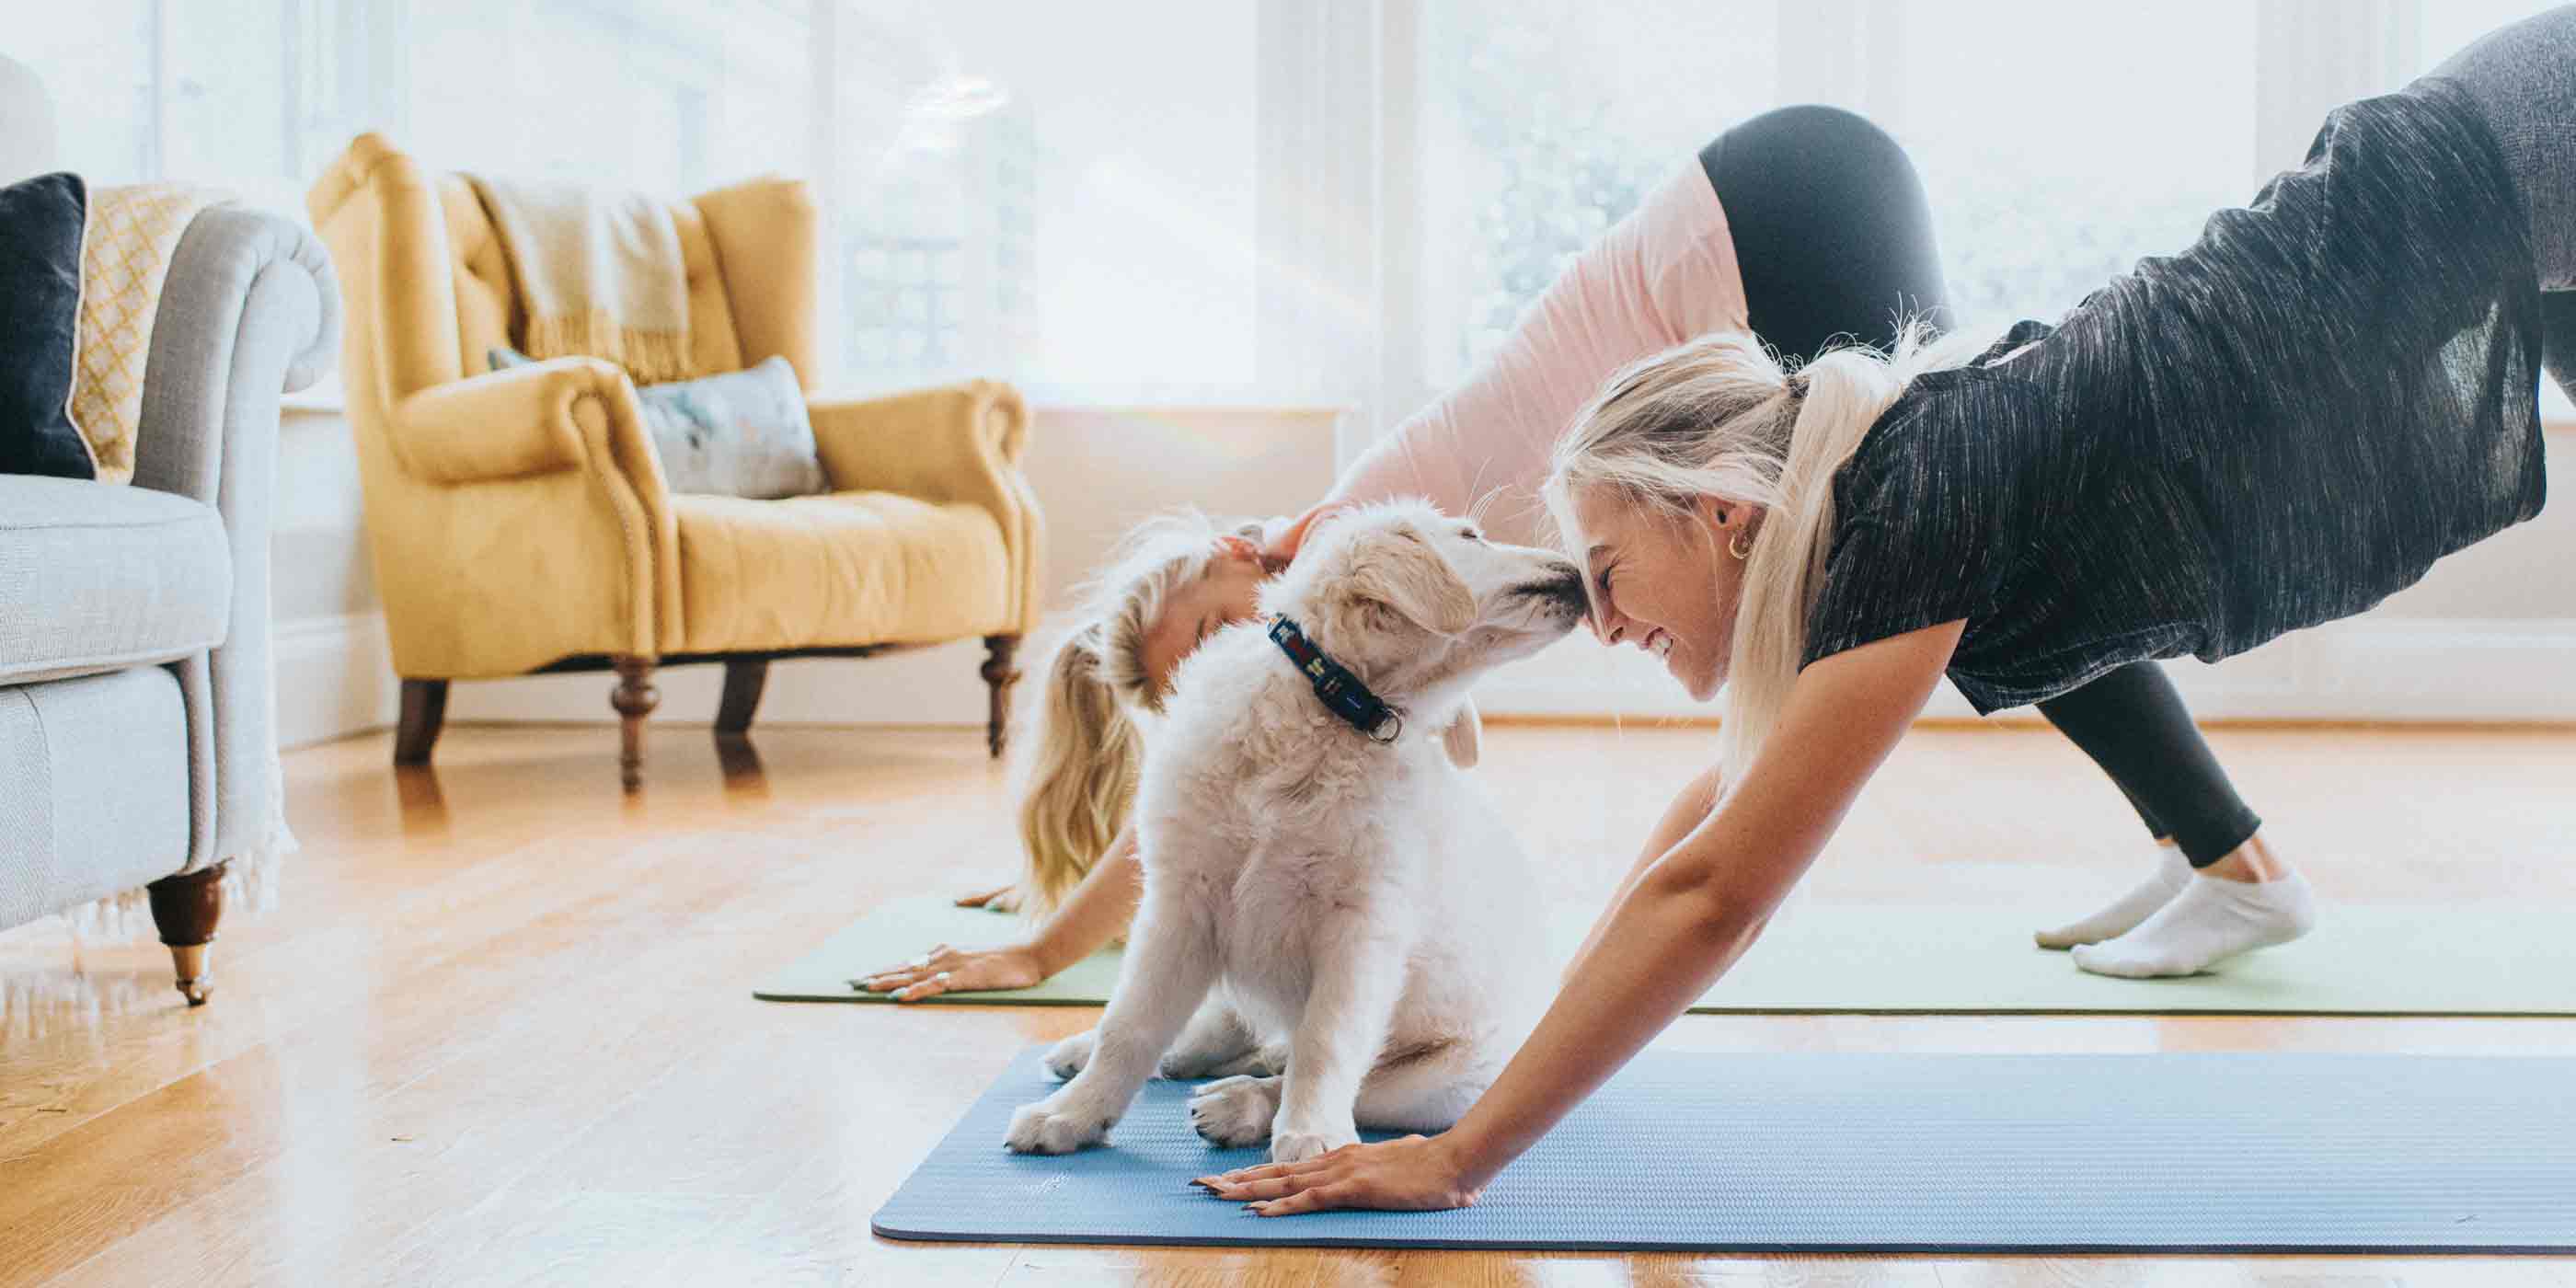 puppy-giving-kisses-to-smiling-young-woman-doing-yoga-pose-downward-dog-with-her-friend-in-a-light-modern-living-room